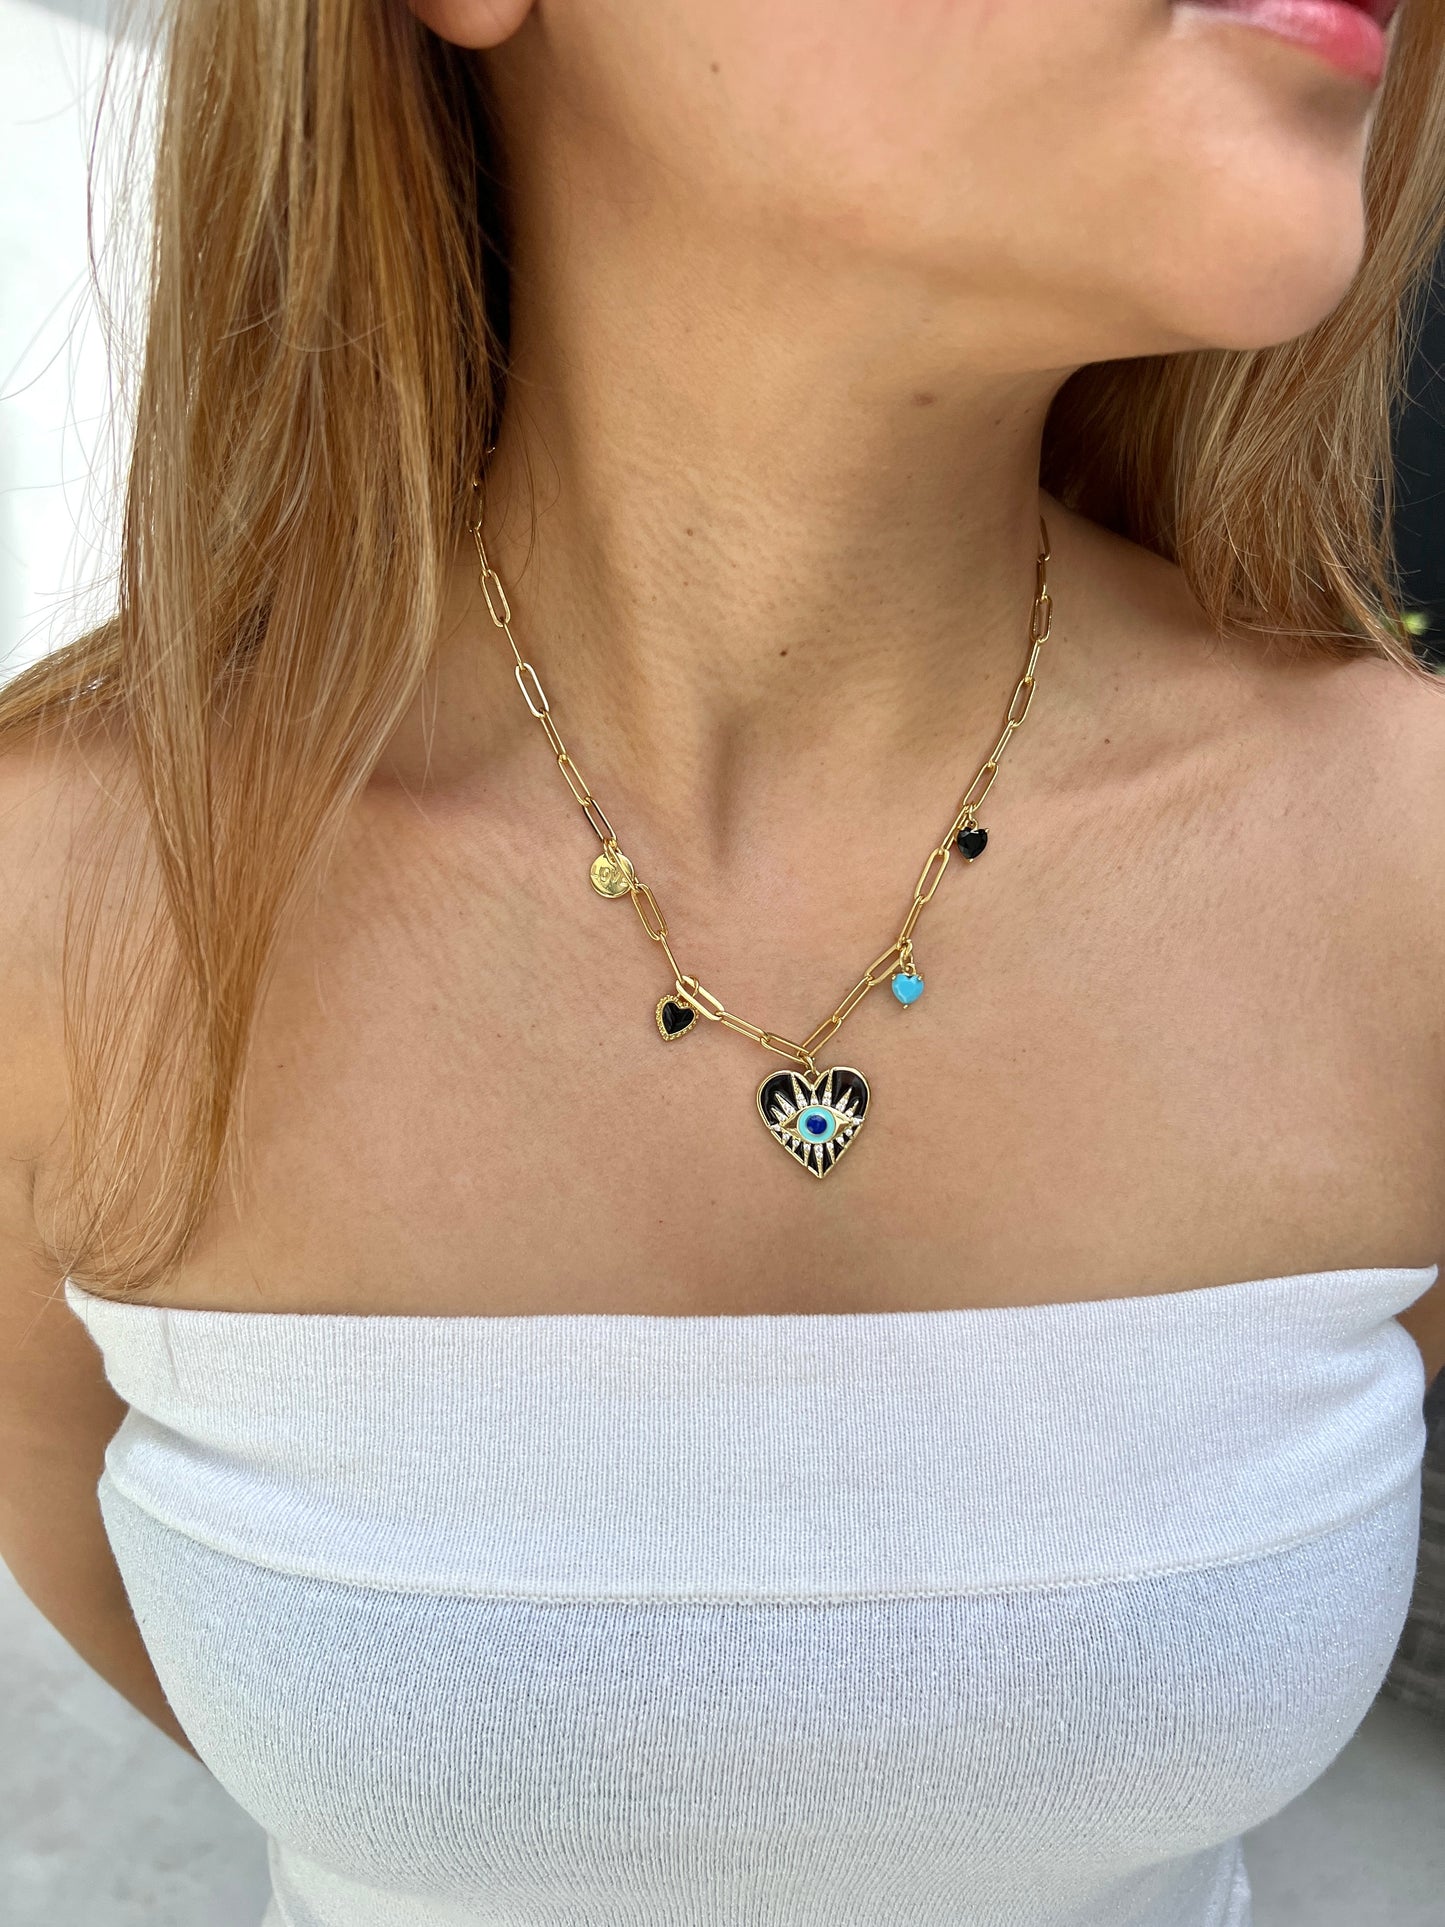 See No Evil Turkish Evil Eye Link Chain Necklaces by Yoga Republik